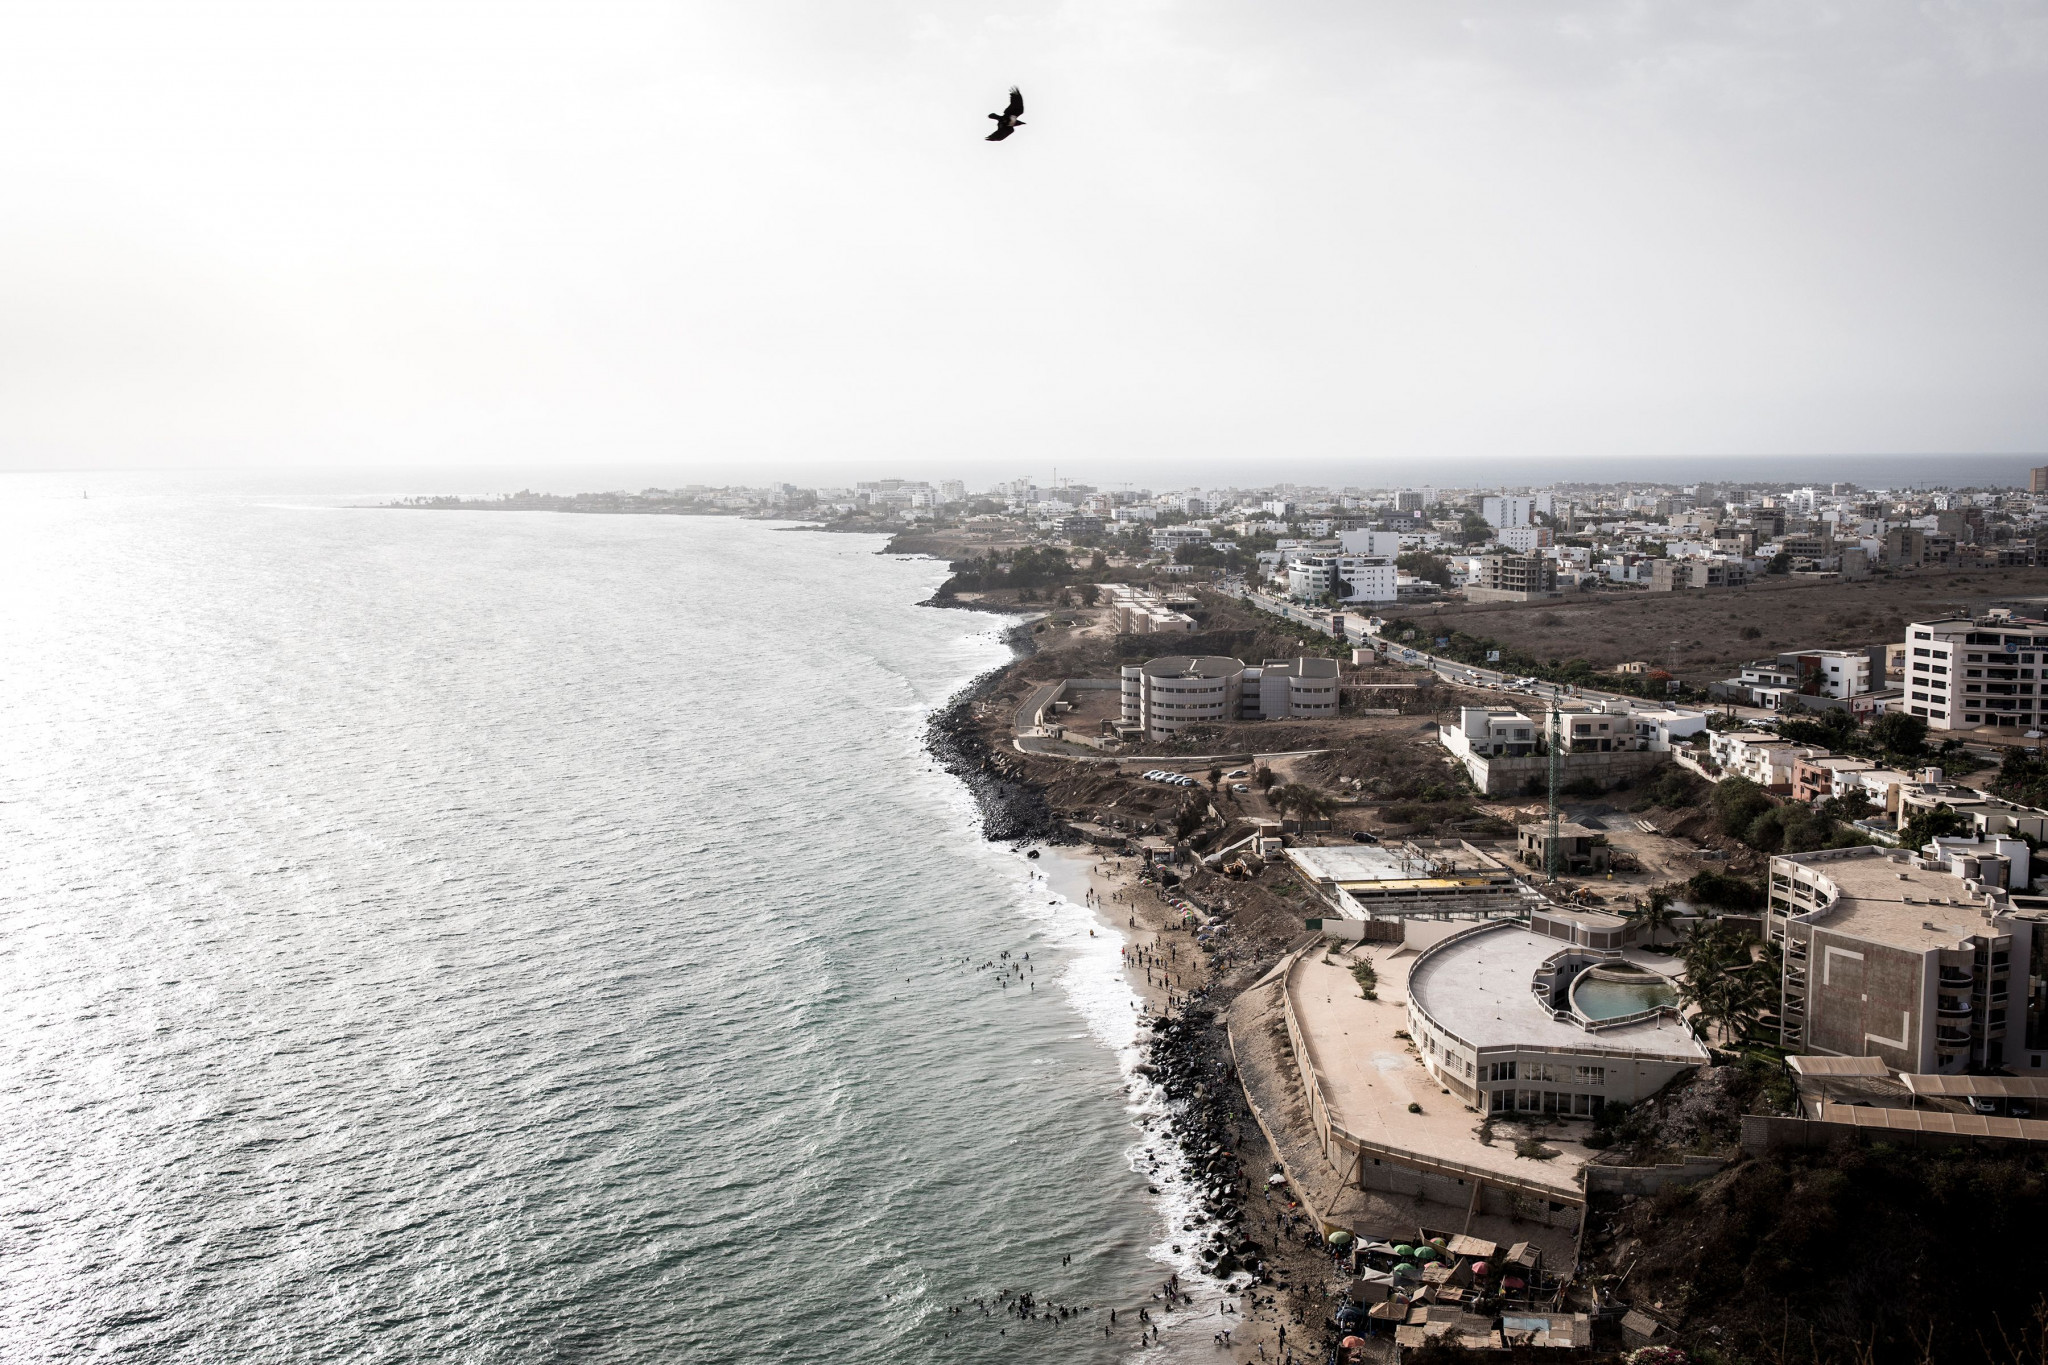 Senegal's capital city Dakar is set to host the Summer Youth Olympic Games in 2026 after being postponed from its original 2022 dates ©Getty Images